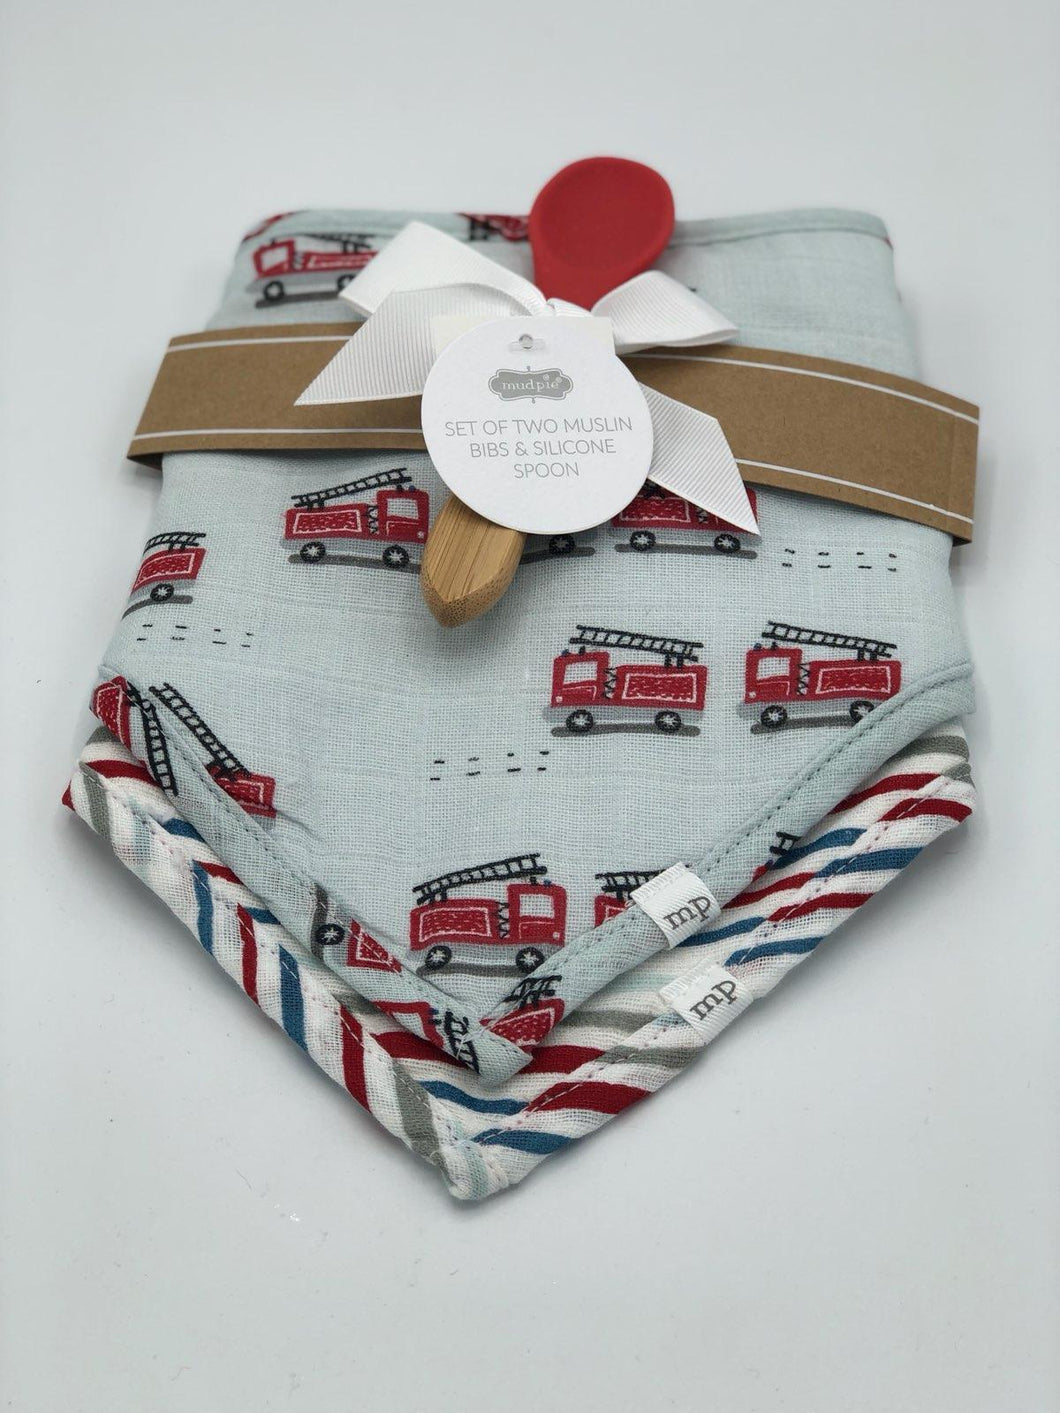 Mud Pie - Firetruck Muslin Bibs (Set of 2) with Silicone Spoon